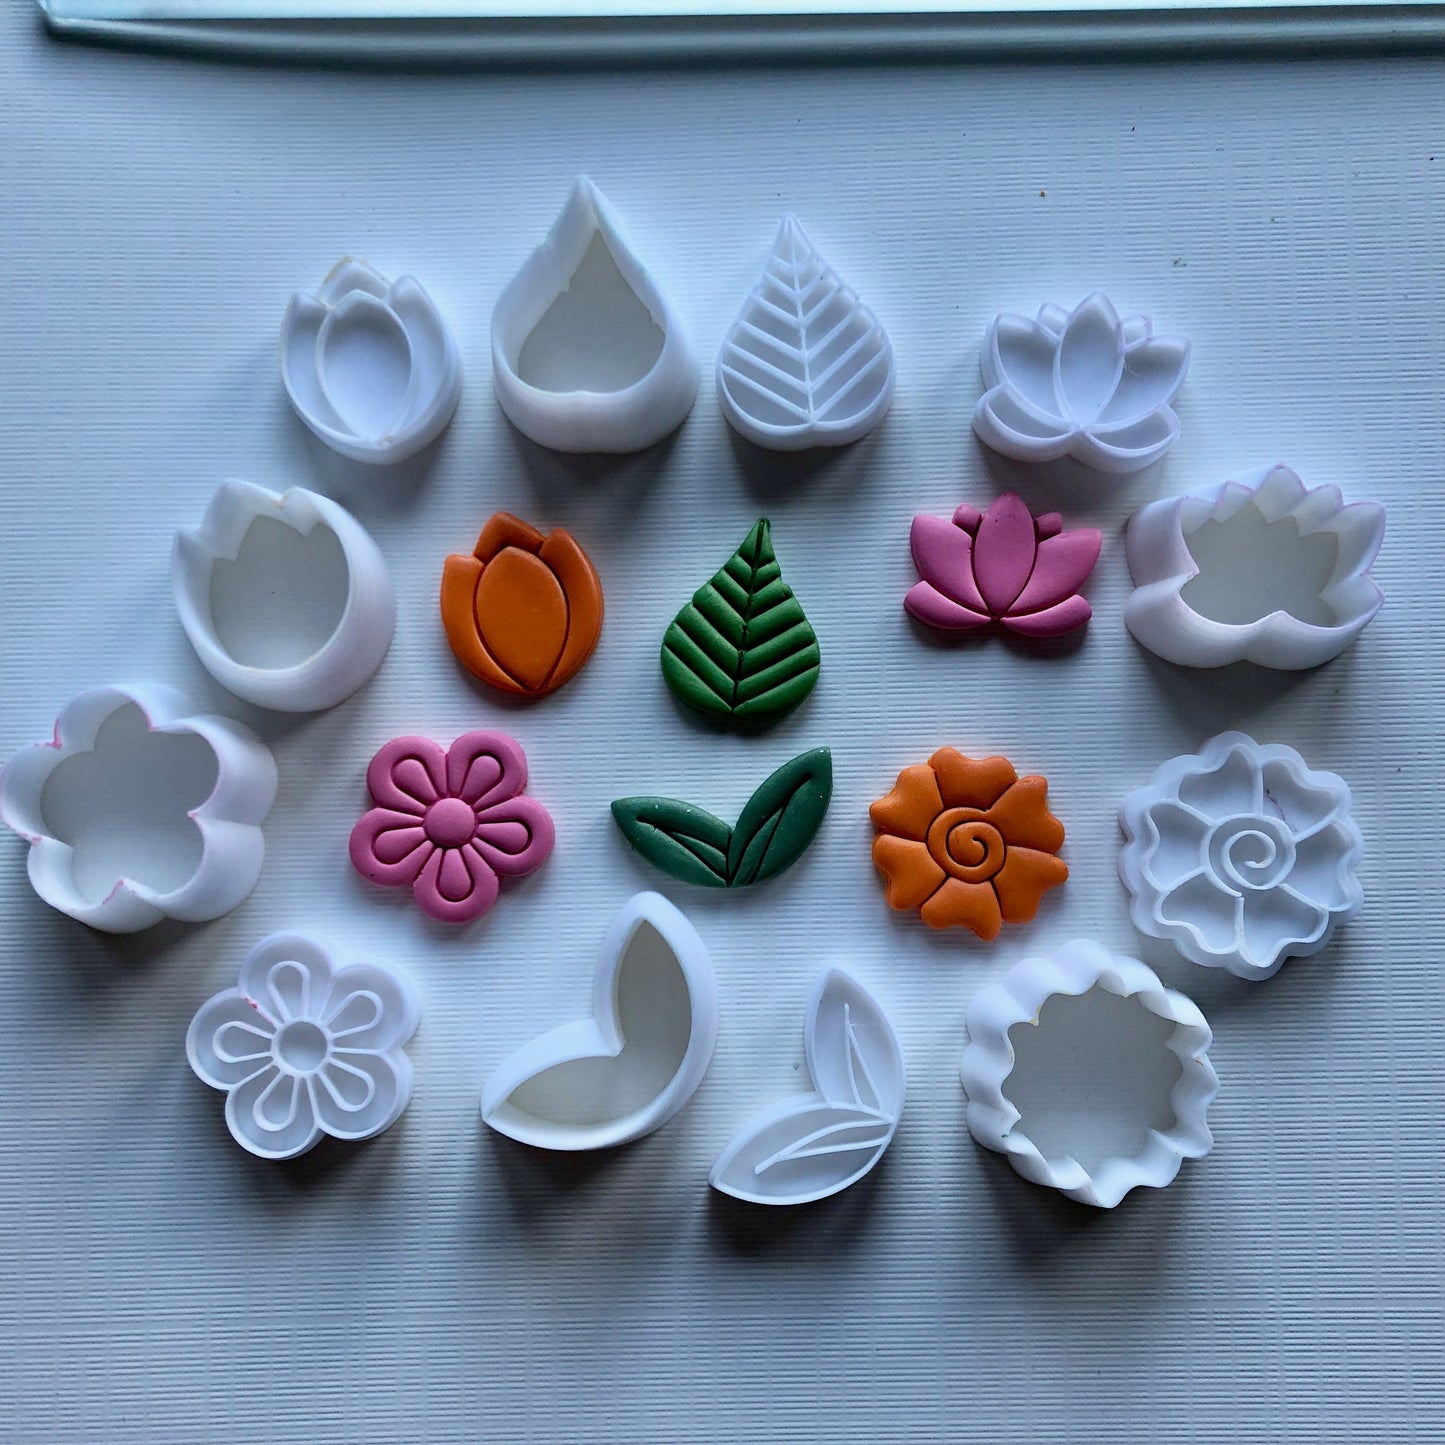 One inch flowers (Set 2) stamps and cutters - made for use with polymer clay